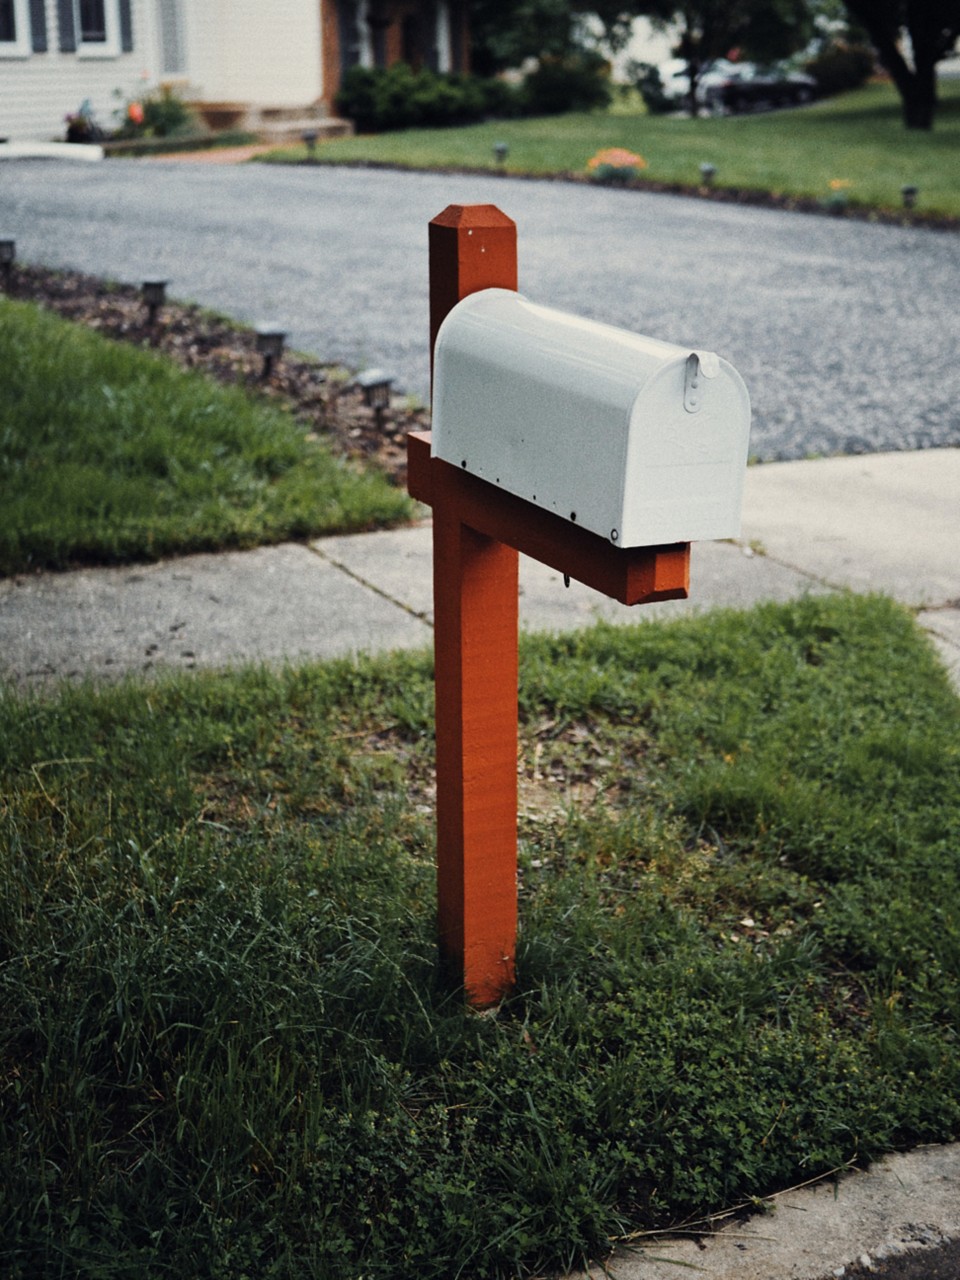 Picture of a mailbox outside a house on the curb